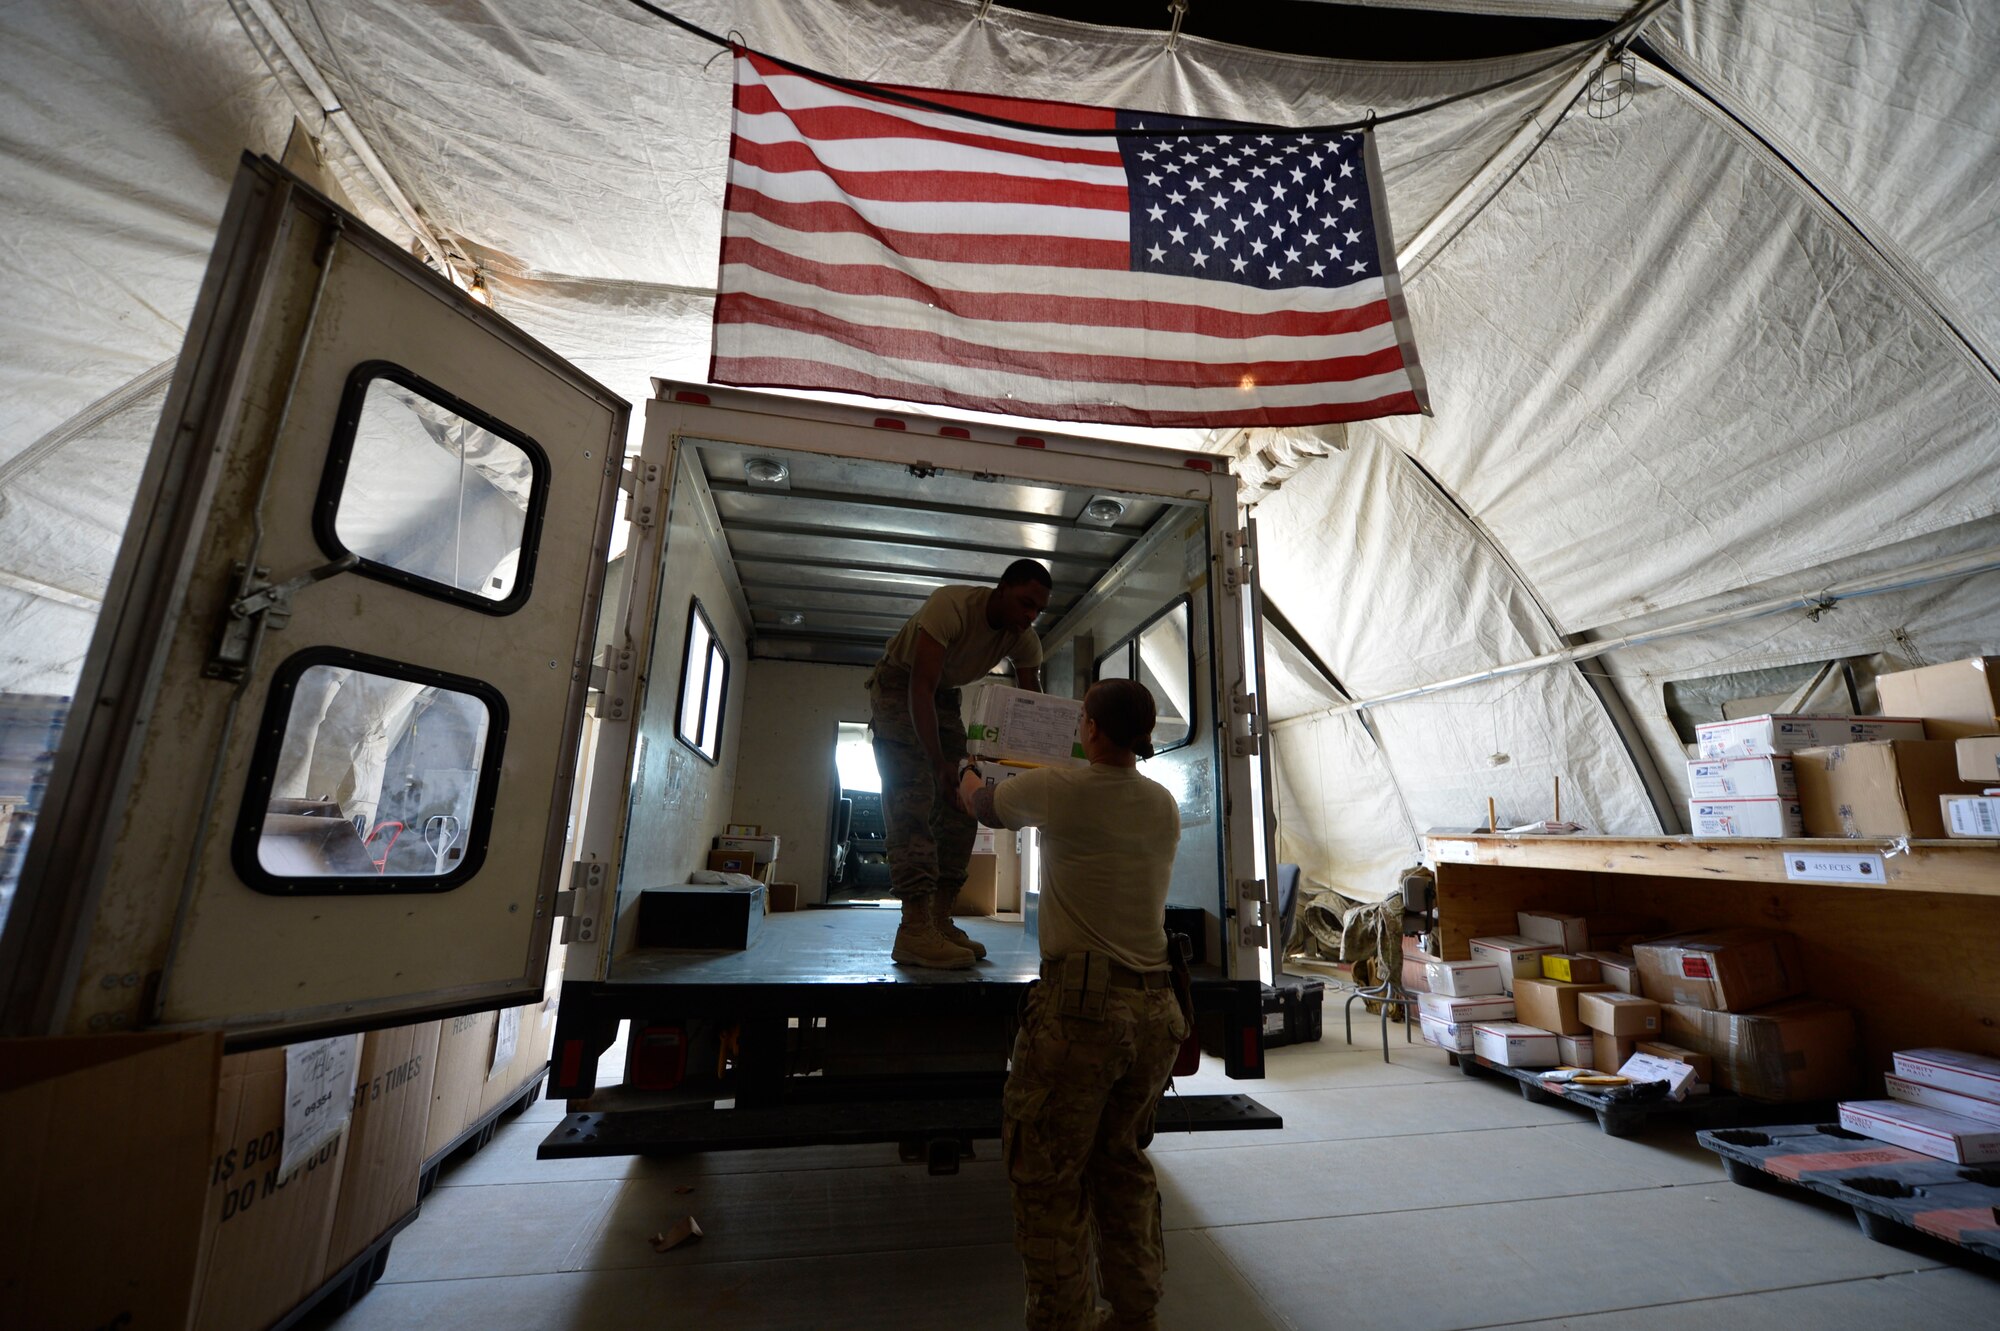 (From left)U.S. Air Force Senior Airmen Lorenza Kates and Victoria Hill, 455th Expeditionary Communications Squadron mail clerks load a truck with mail at Bagram Airfield, Afghanistan June 26, 2014.  Kates and Hill are responsible for handling mail for Airmen in the 455th Air Expeditionary Wing.  They handle thousands of packages and letters per month.  Kates is deployed from Davis Monthan Air Force Base, Ariz. and a native of Dublin, Ga. Hill is deployed from Whiteman Air Force Base, Mo. and a native of Blanchard, La.  (U.S. Air Force photo by Staff Sgt. Evelyn Chavez)